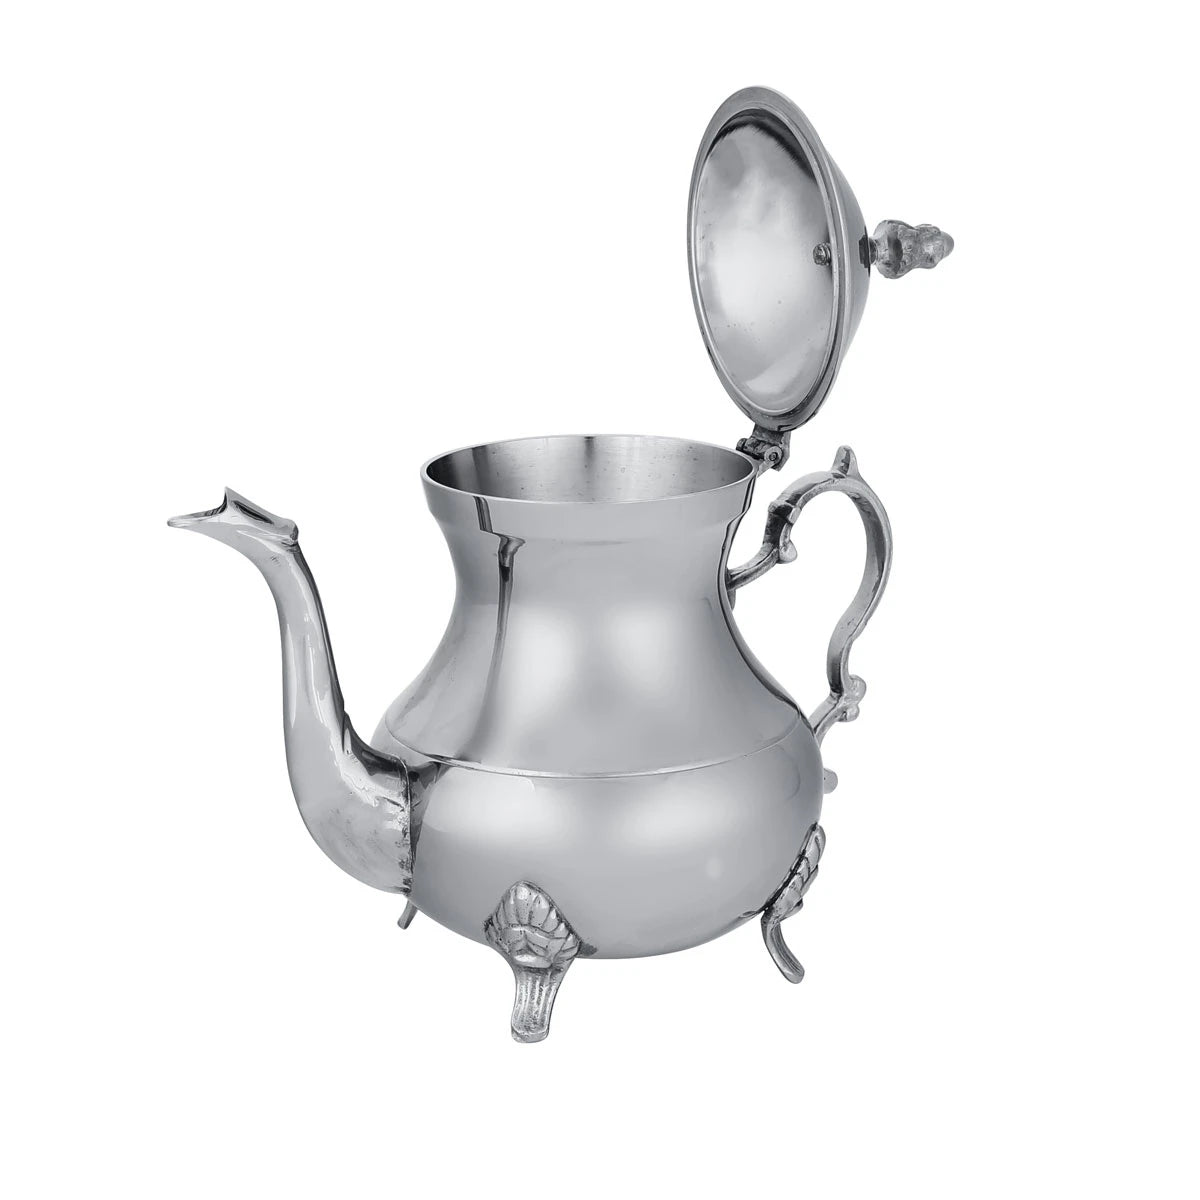 Front View of Plain Brass Teapot - Glossy Silver with Open Top